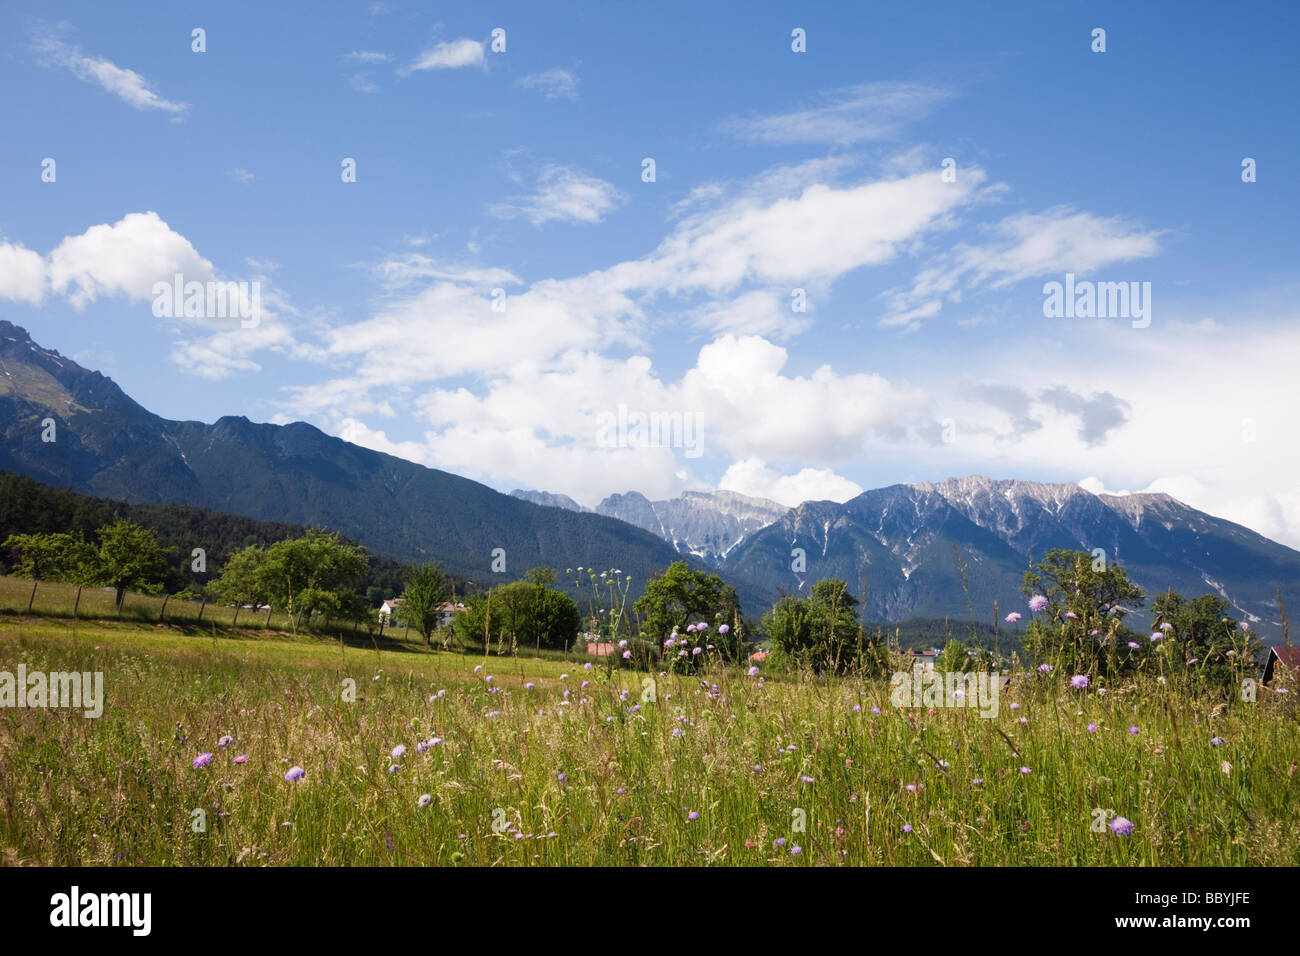 Imst Tyrol Austria Europe June Summer Alpine flower meadow in green valley with mountains beyond Stock Photo